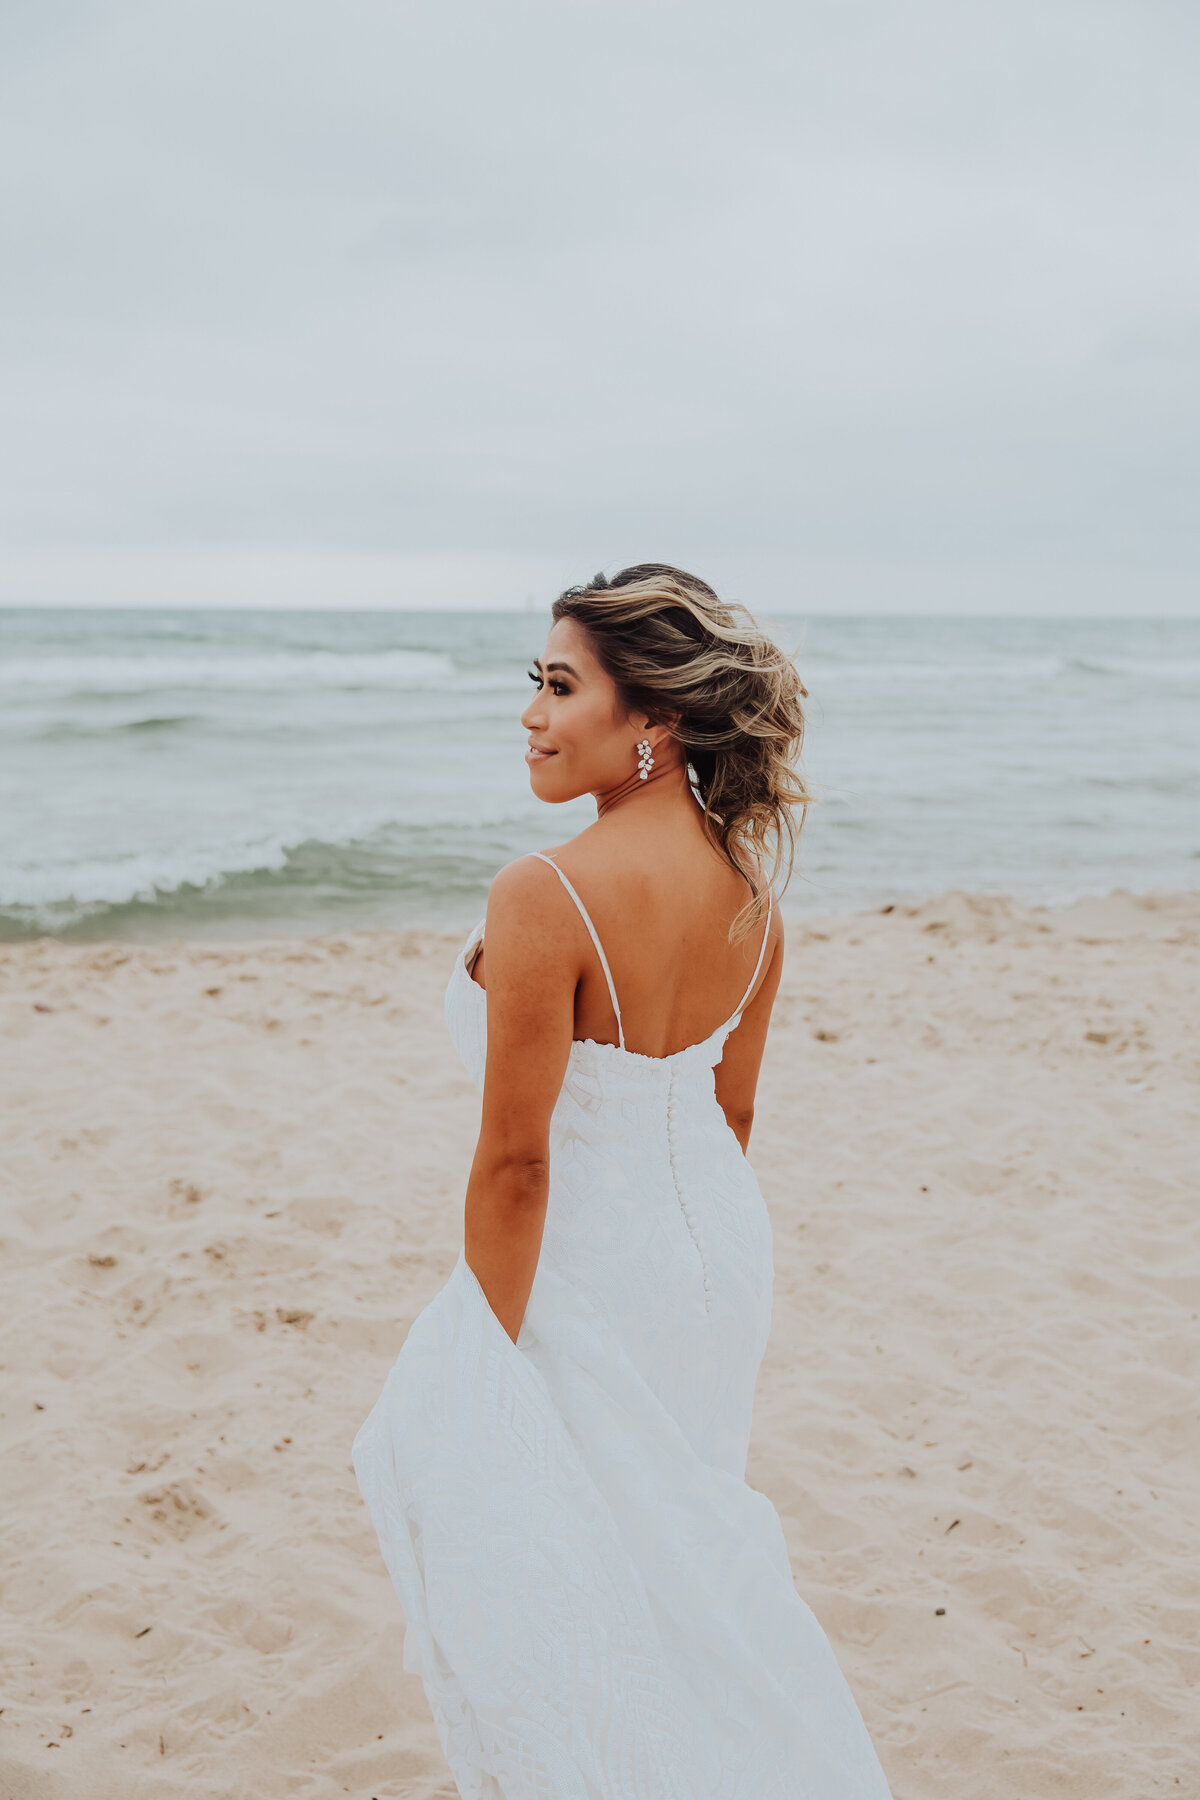 here is a guide to choosing your michigan wedding vendors